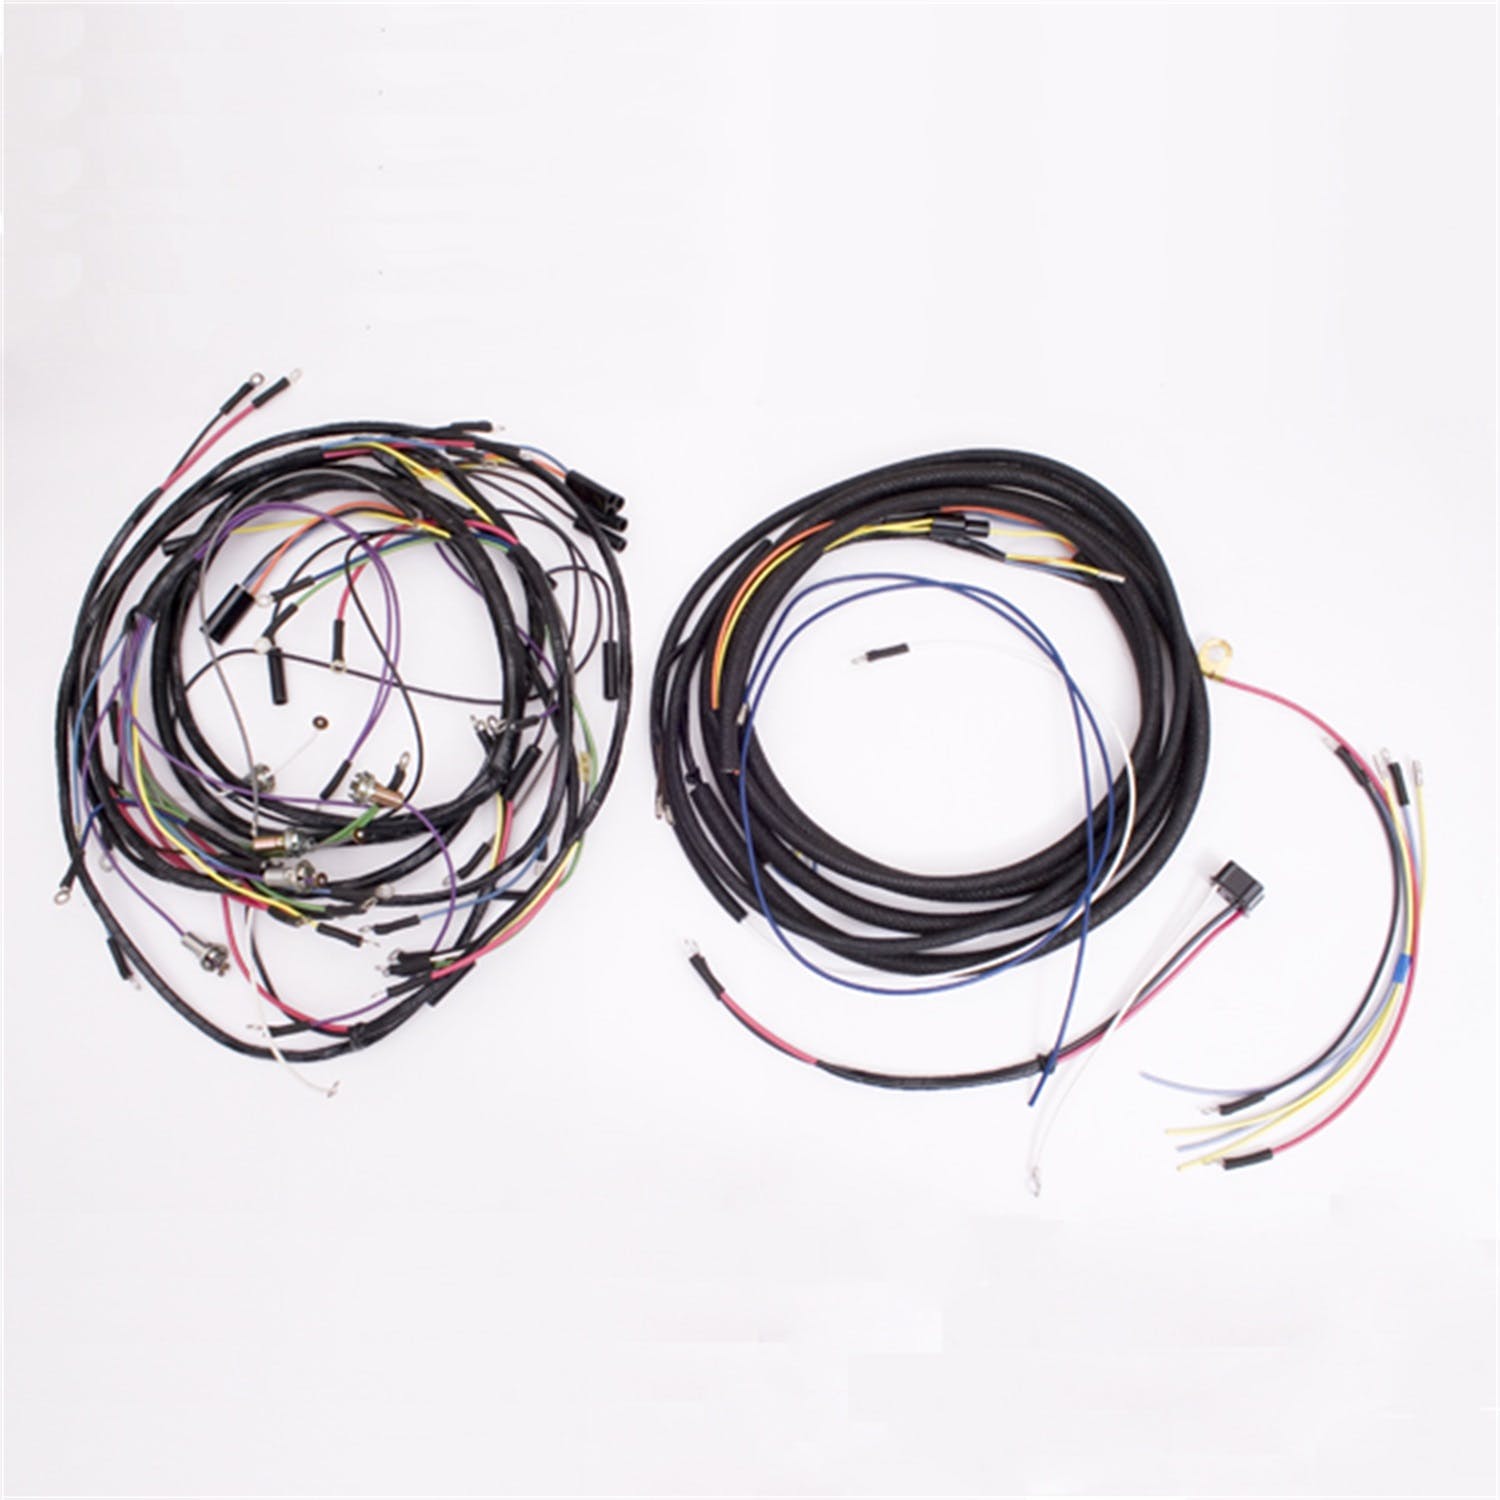 Omix-ADA 17201.10 Compete Wiring Harness with Cloth Wire Cover